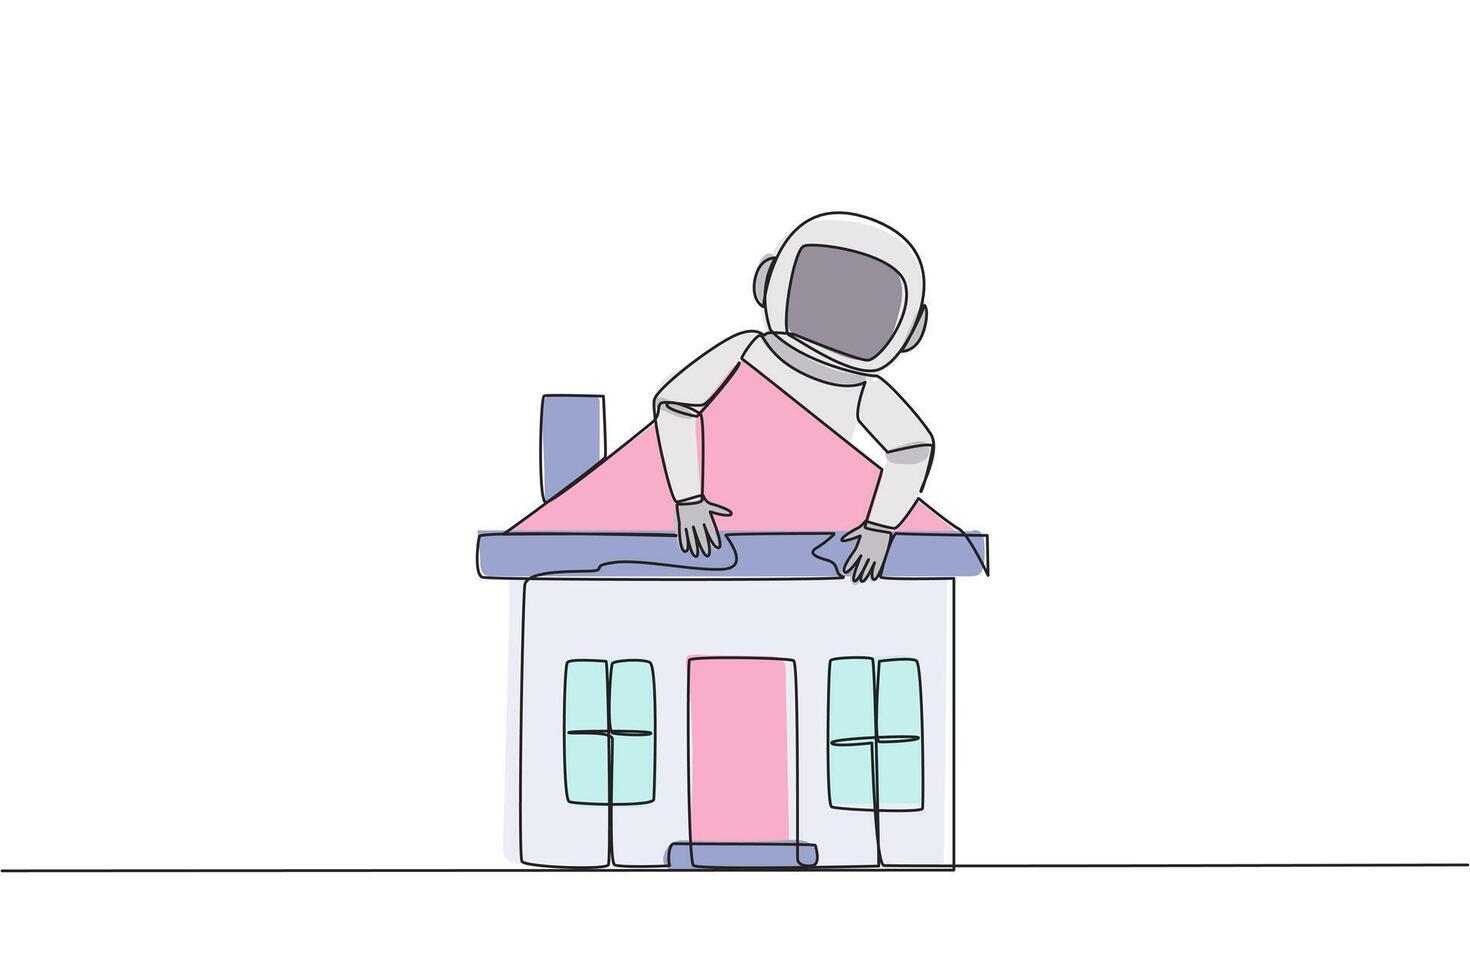 Continuous one line drawing young energetic hugging miniature house. Astronauts want to go home when the mission is over. Miss homeland. Cosmonaut. Cosmic. Single line draw design vector illustration